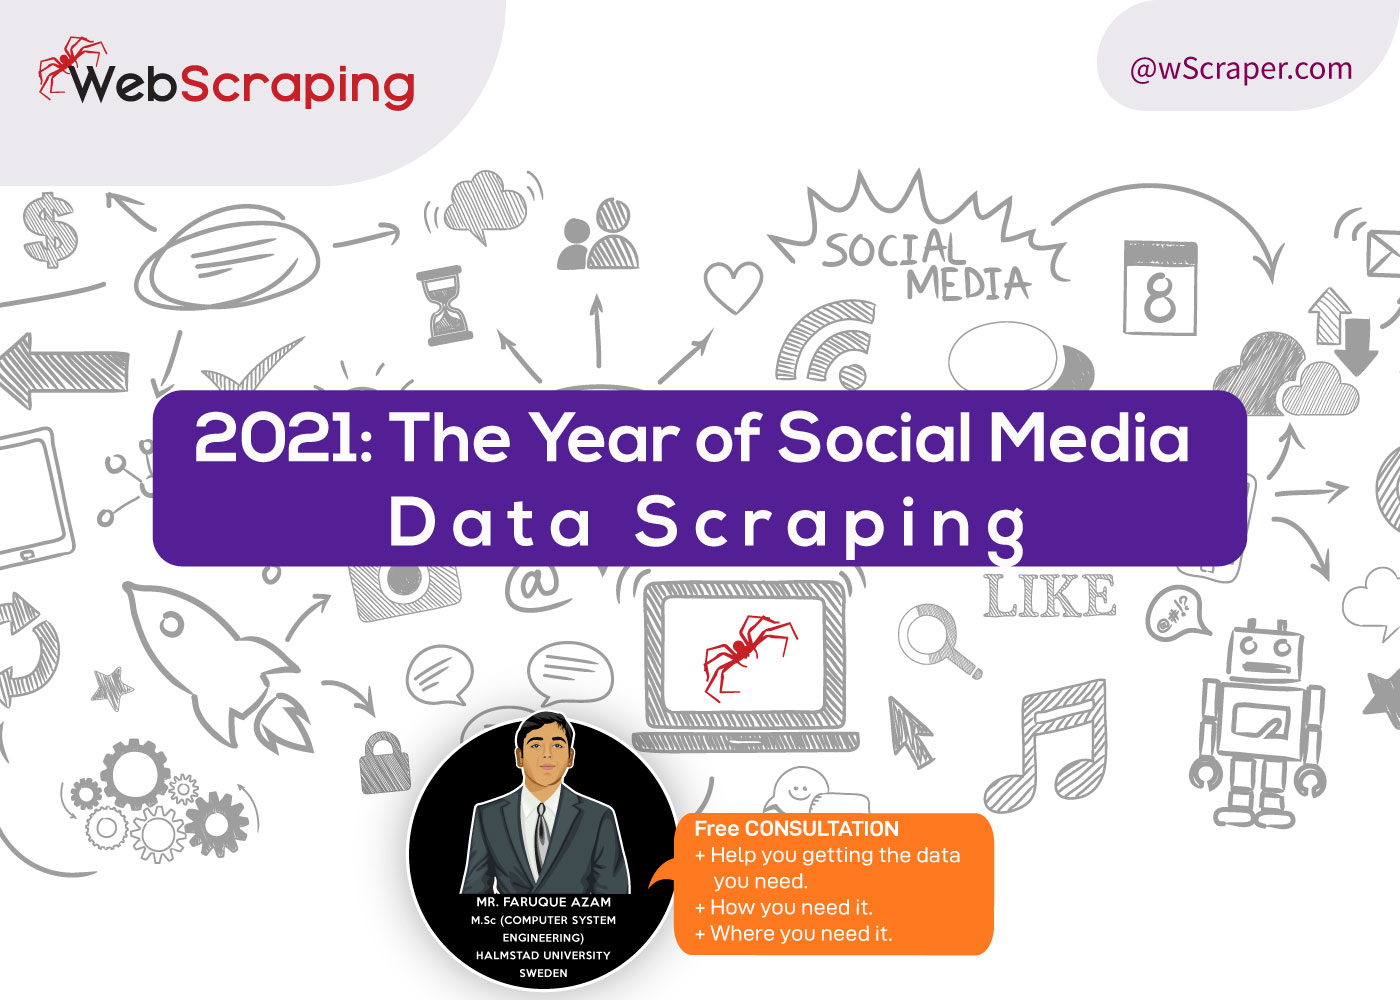 Scraping: A Fascinating Behind The Scenes 2021